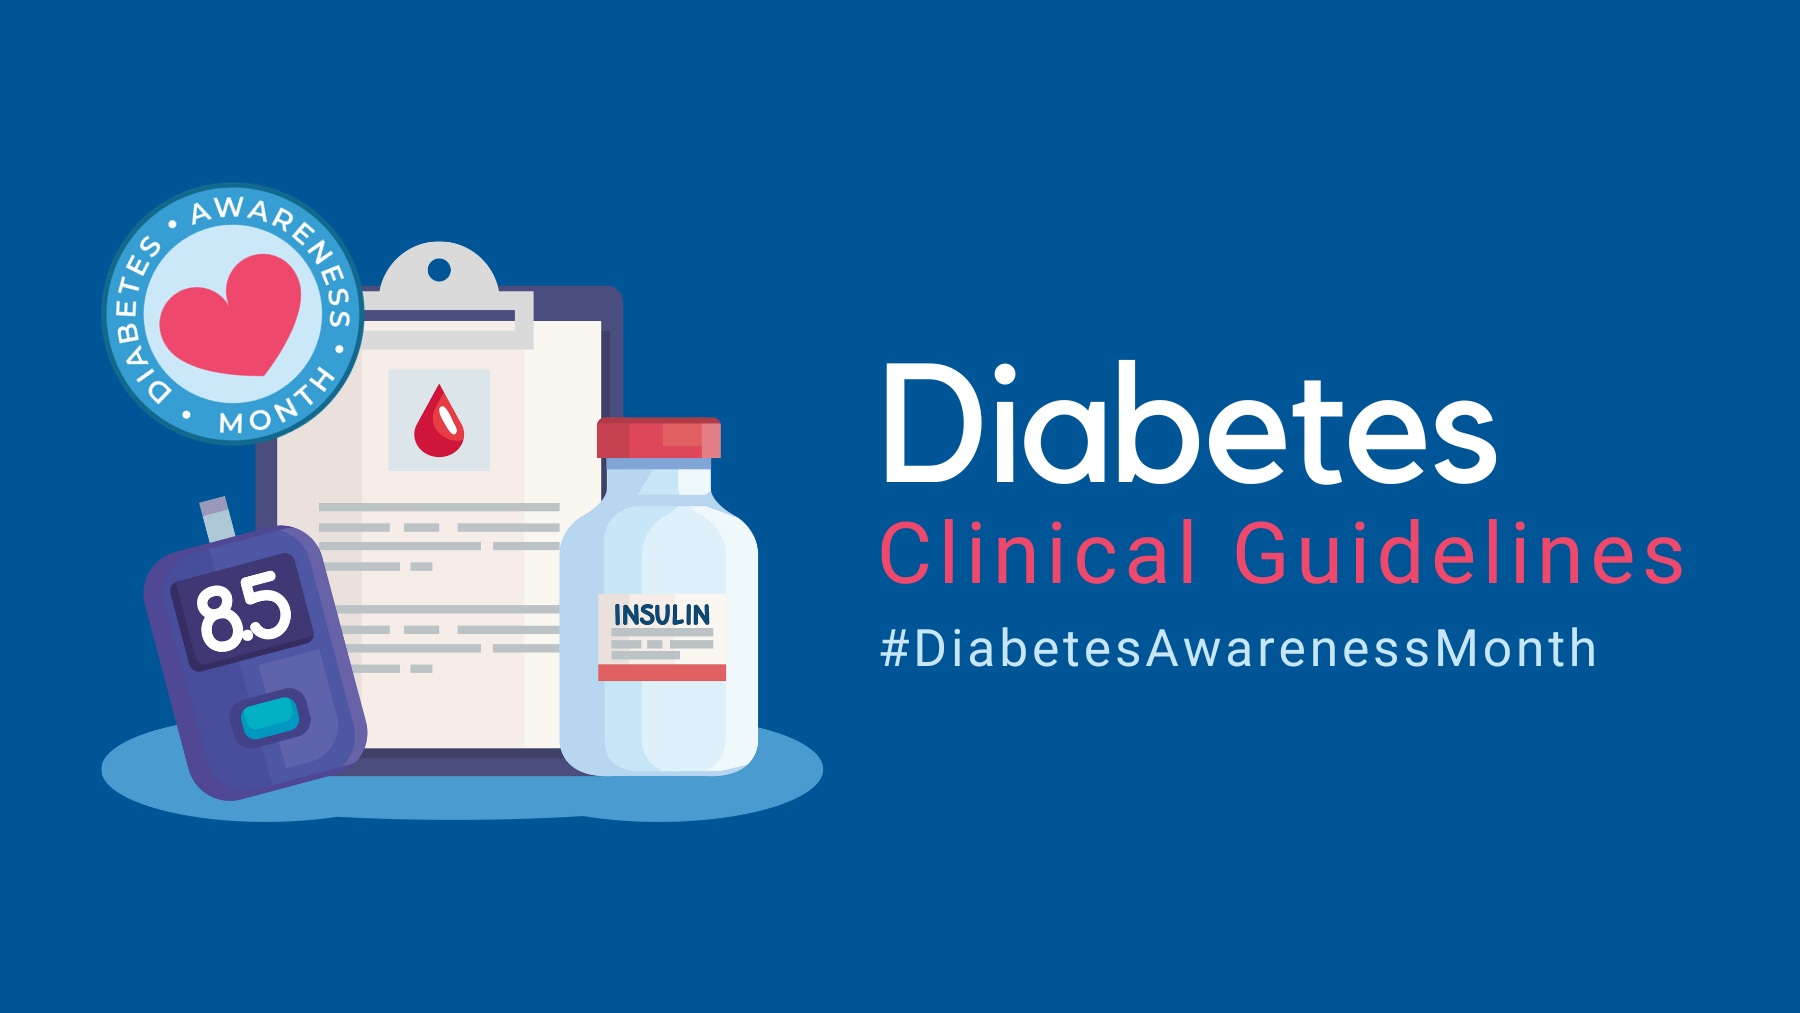 Diabetes Clinical Guidelines for Diabetes Awareness Month Hero Image